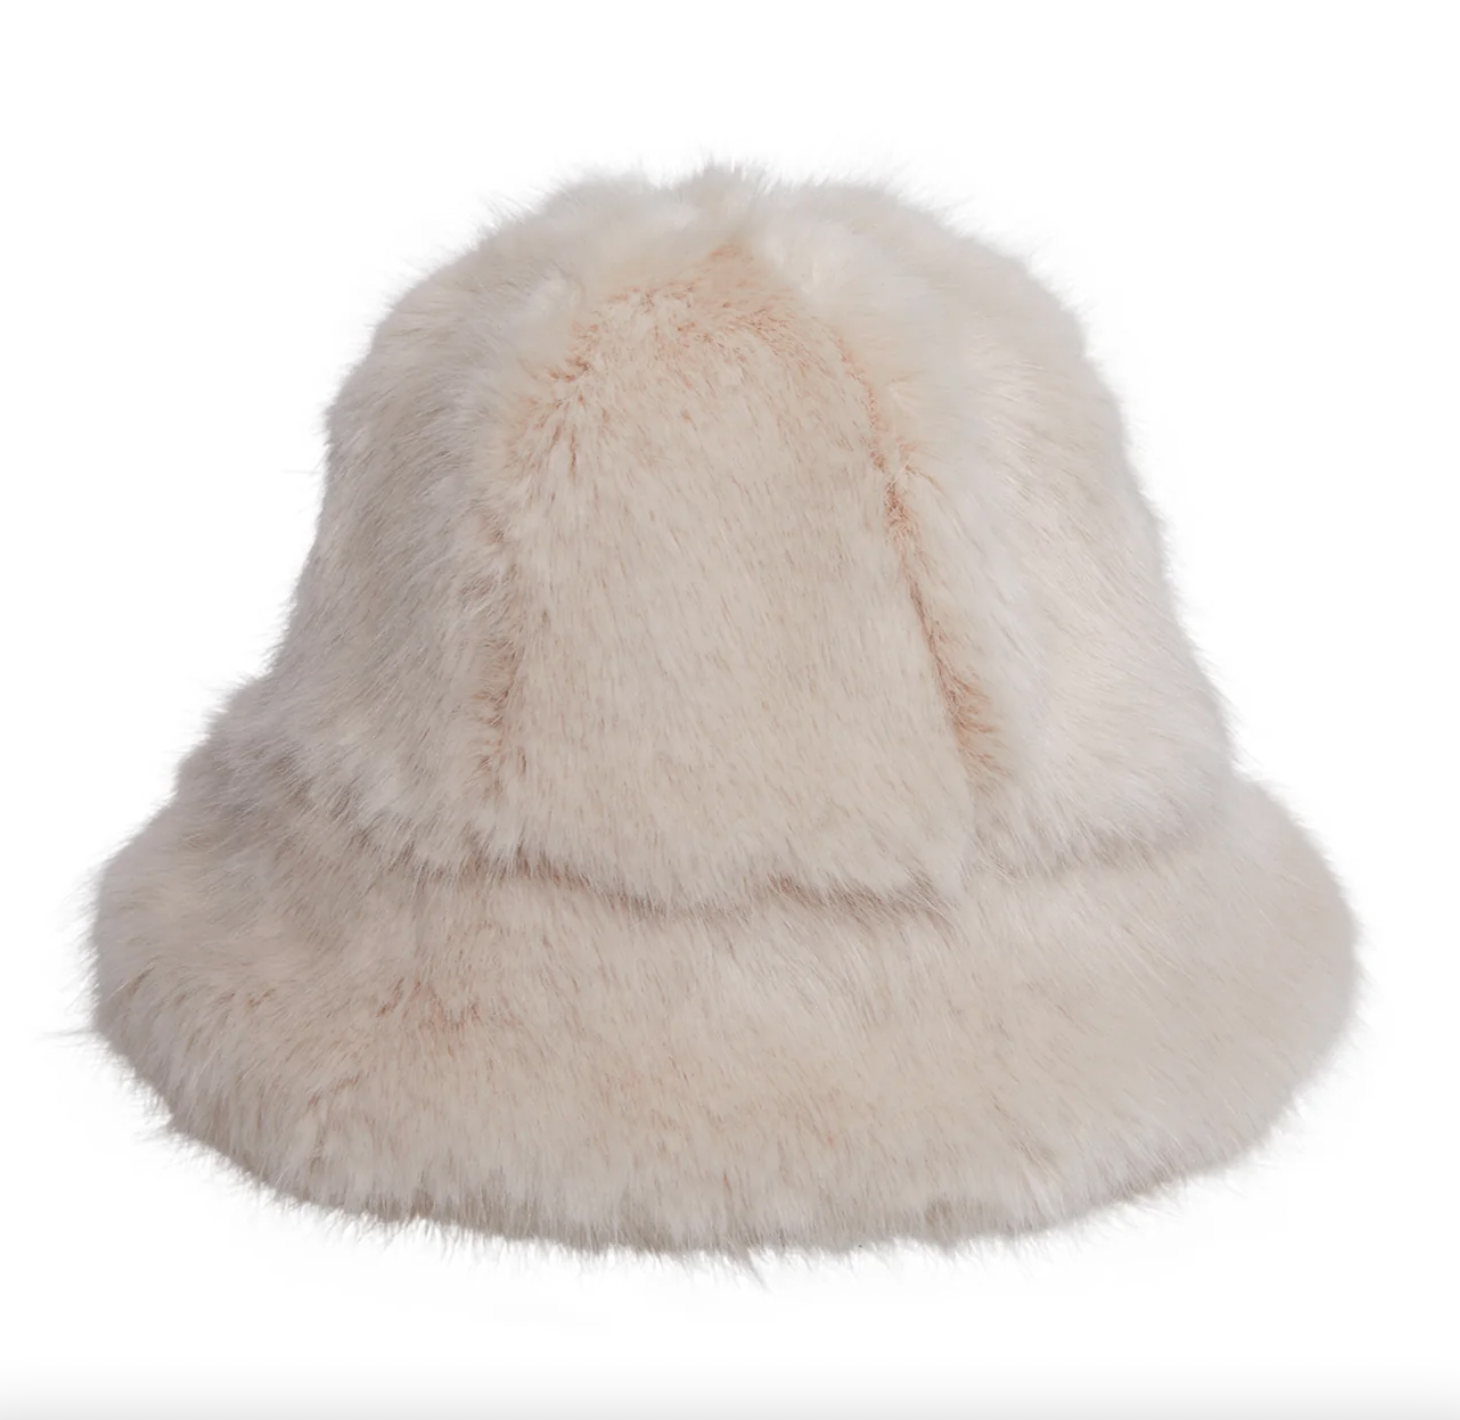 Product Image for Sierra Hat, Crema